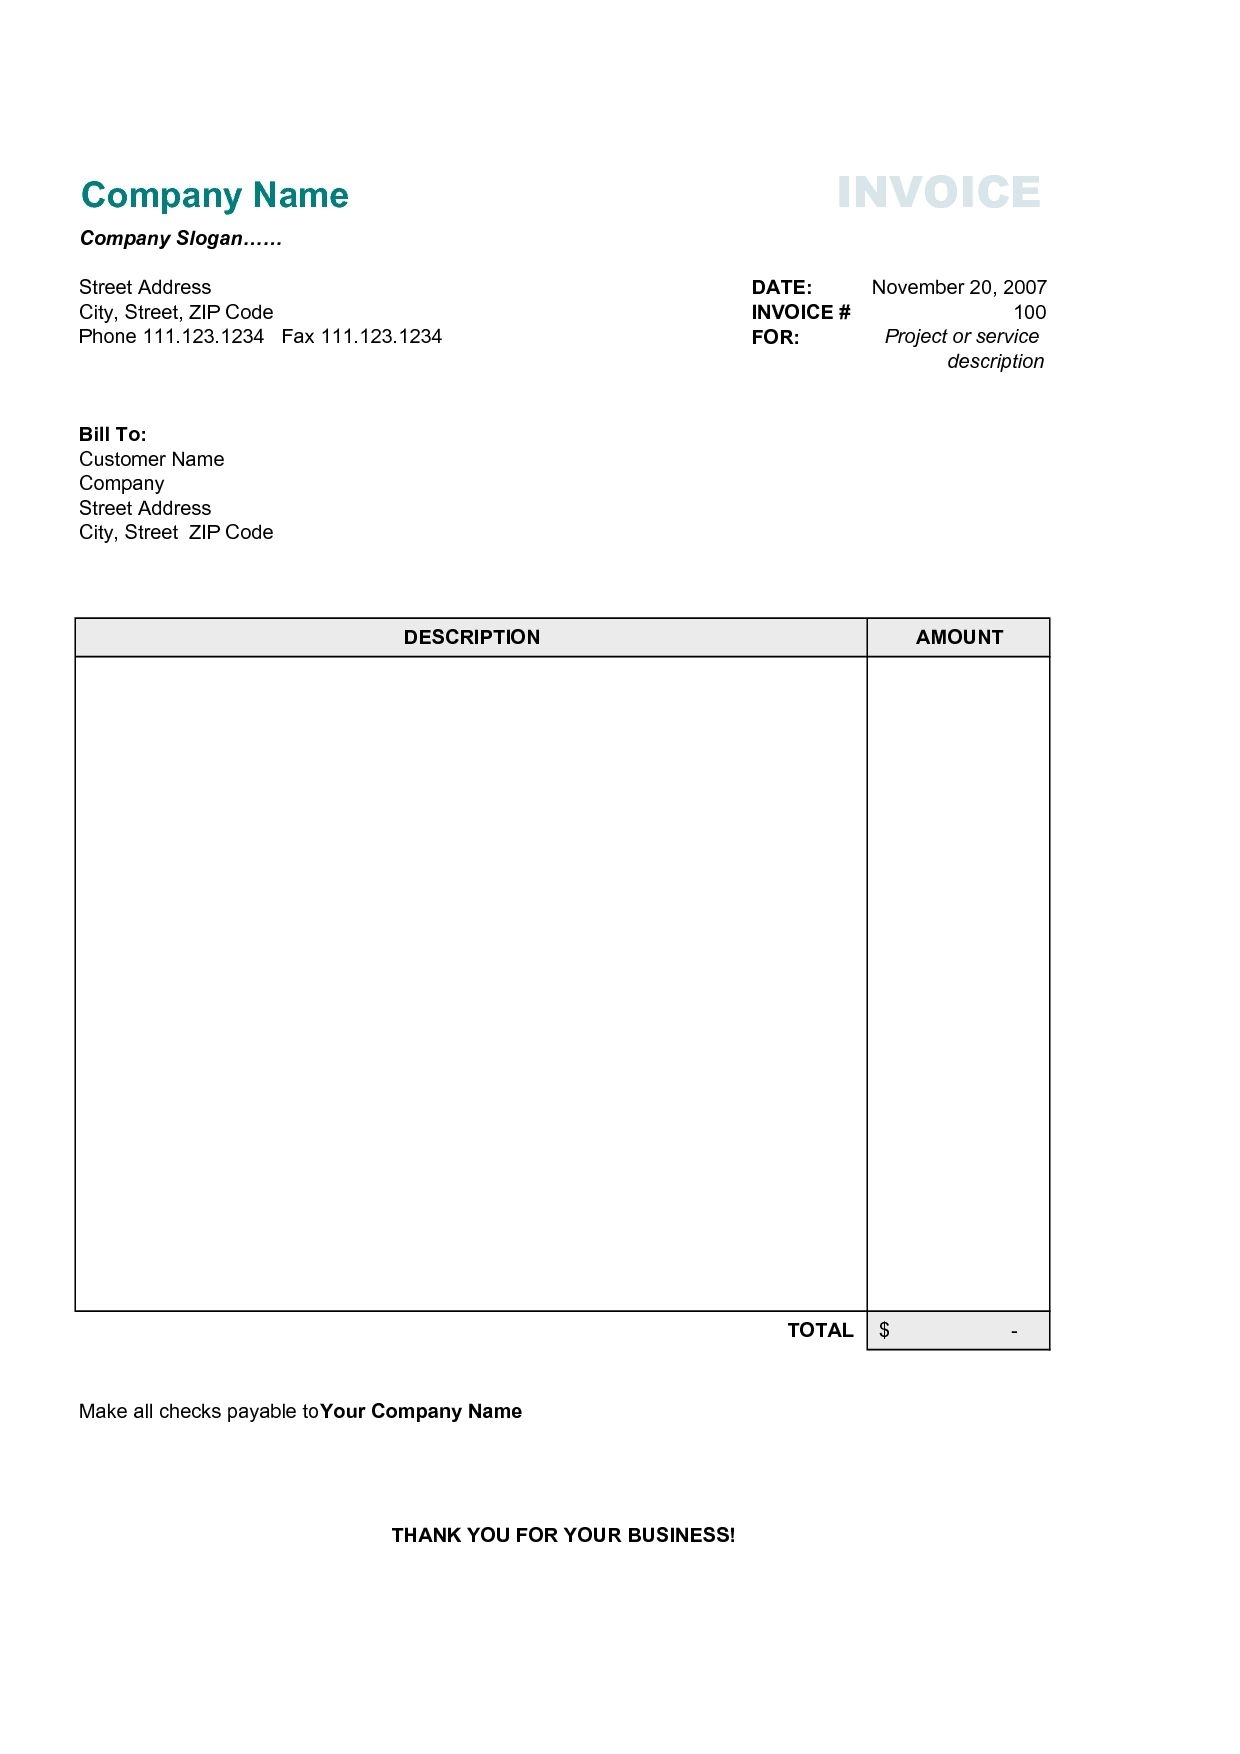 Free Business Invoice Template Best Business Template Free Invoice